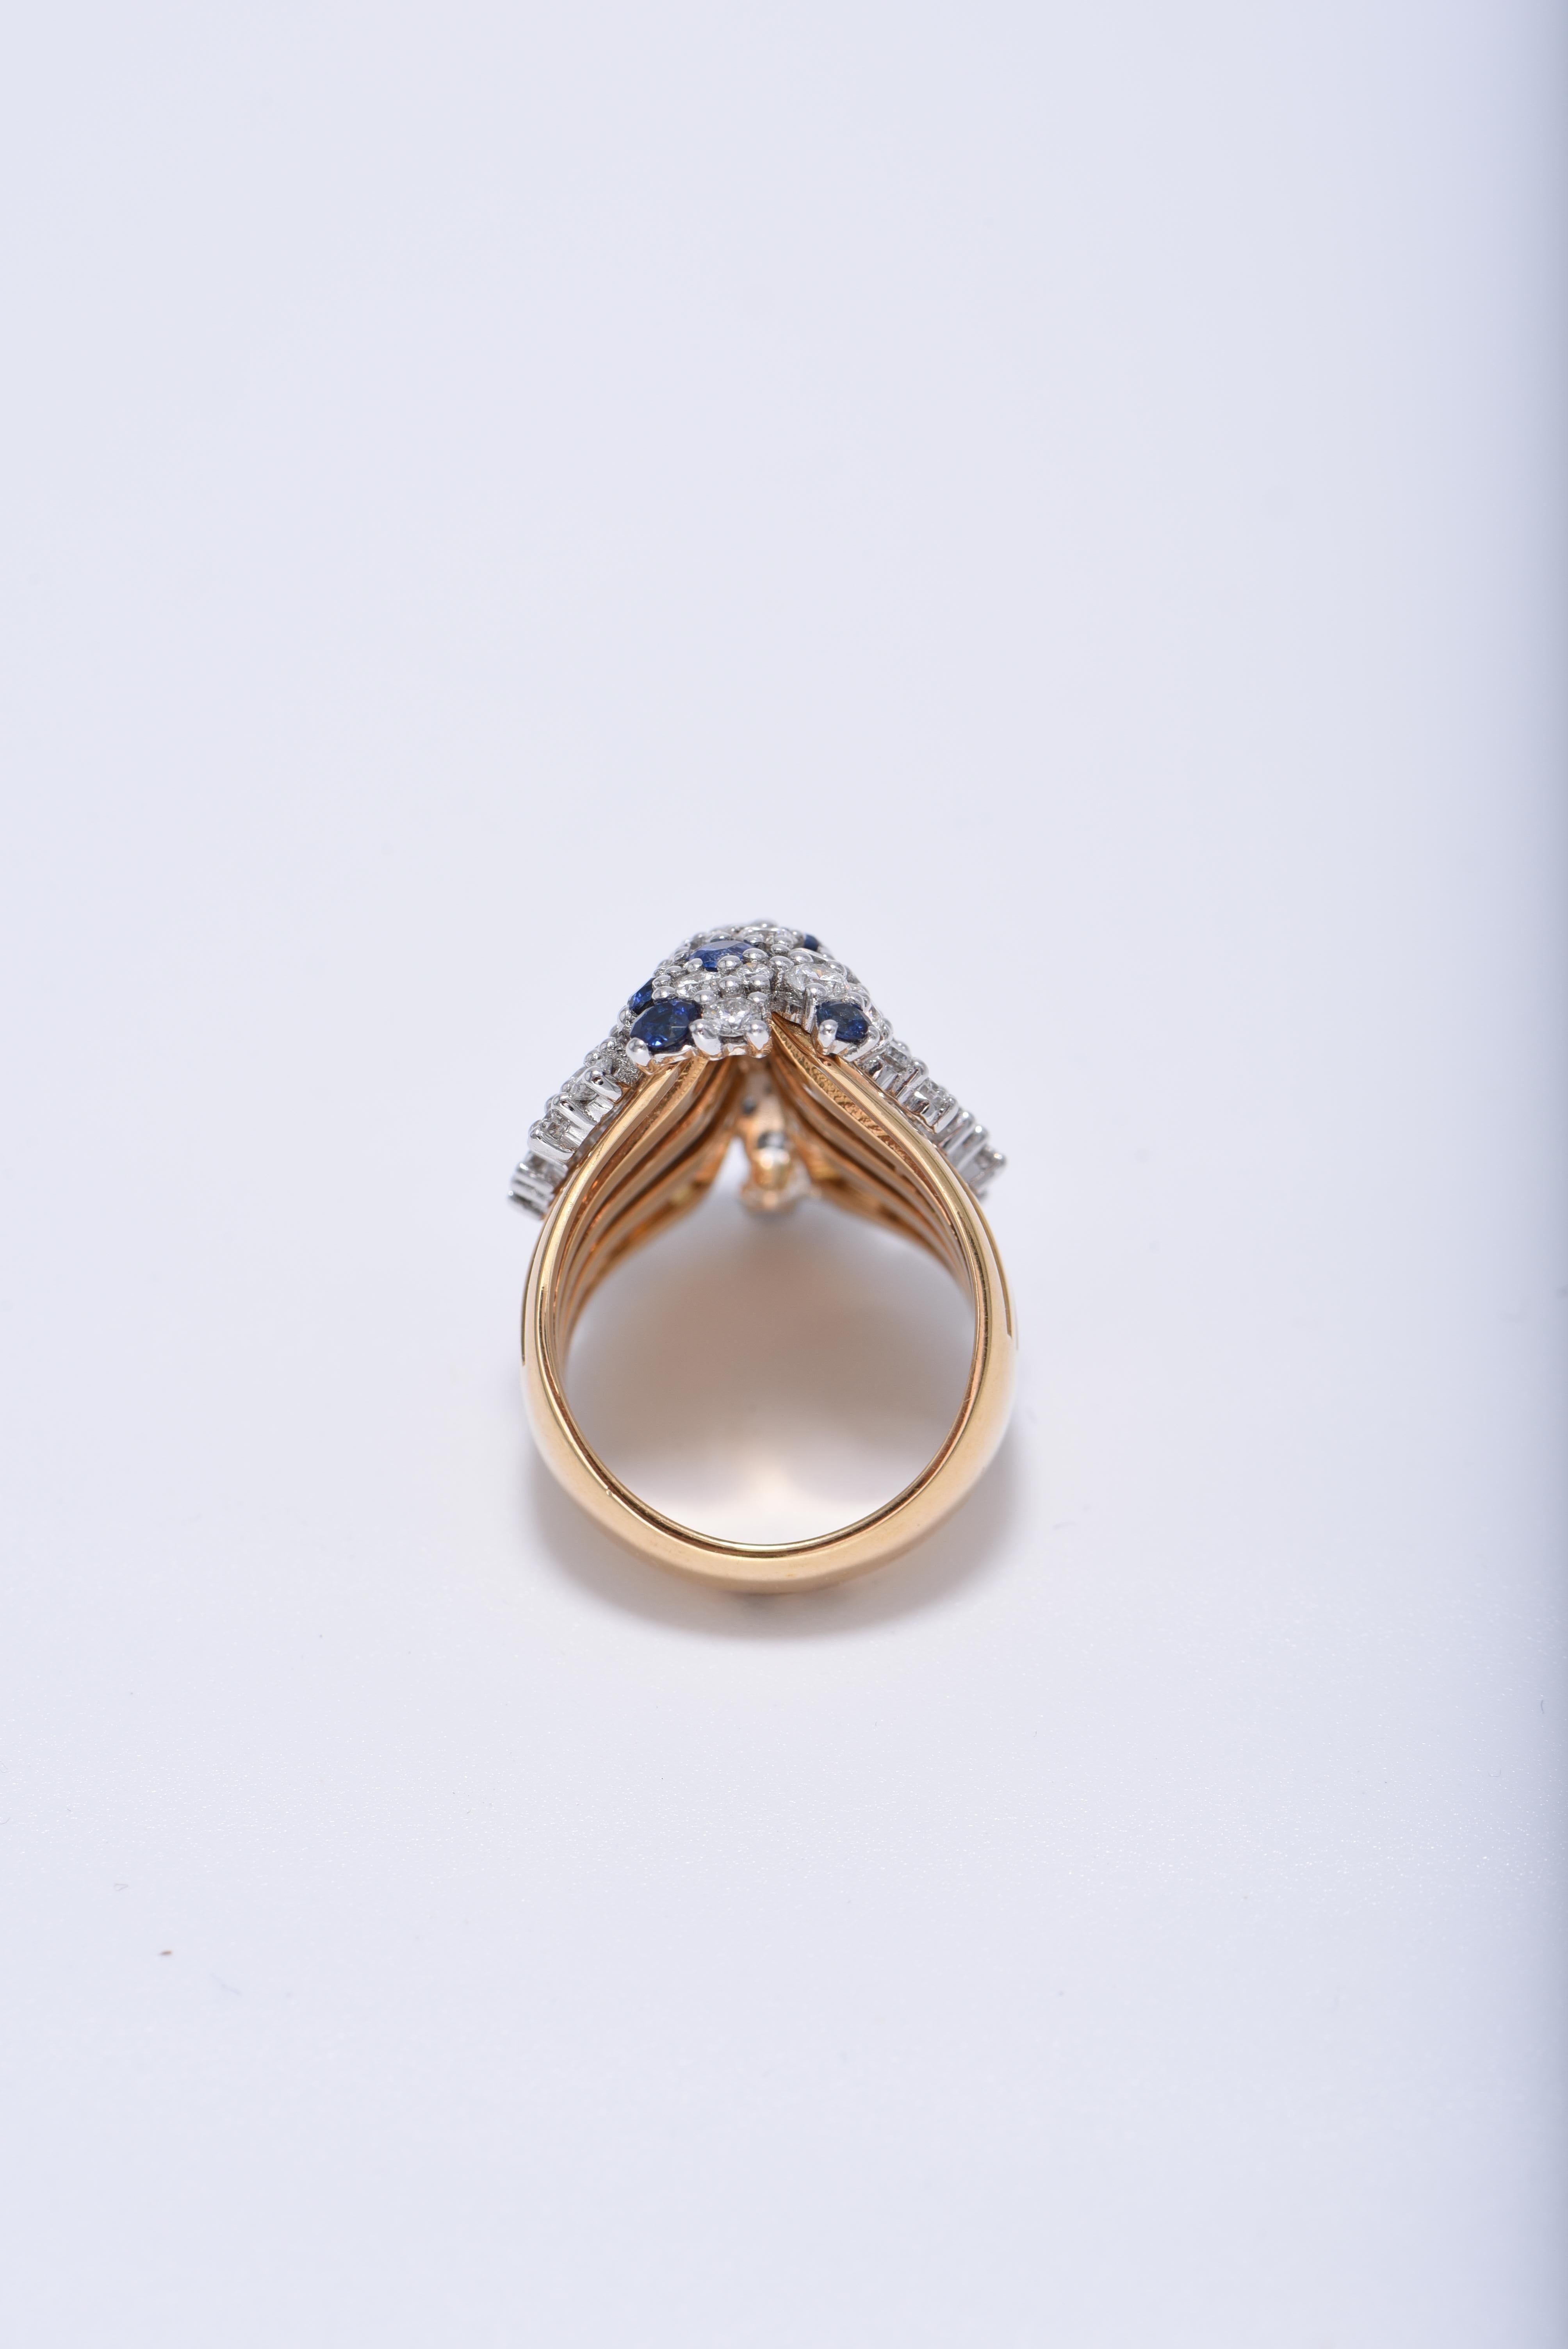 For Sale:  18K Gold, White Diamond, and Blue Sapphire Ring 5